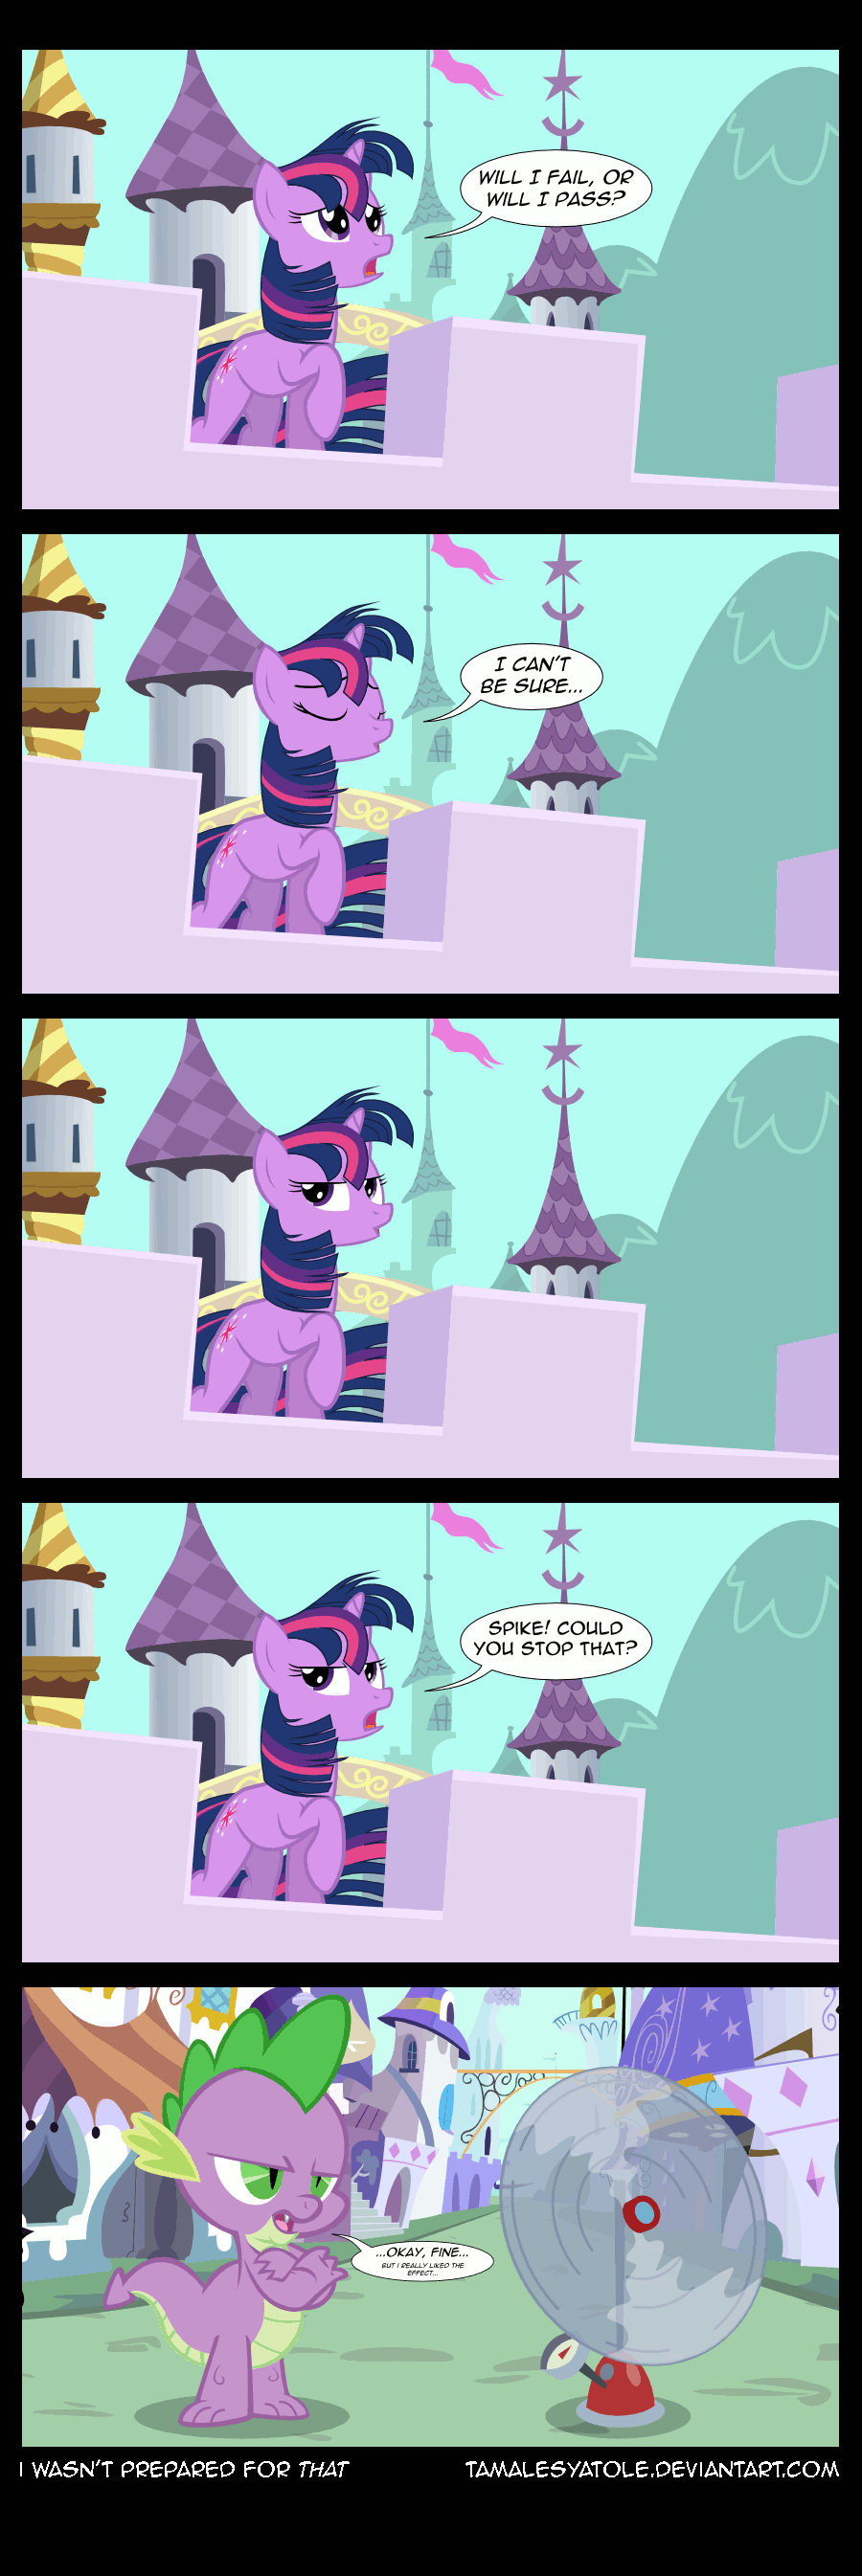 i_wasn__t_prepared_for_that_by_tamalesya